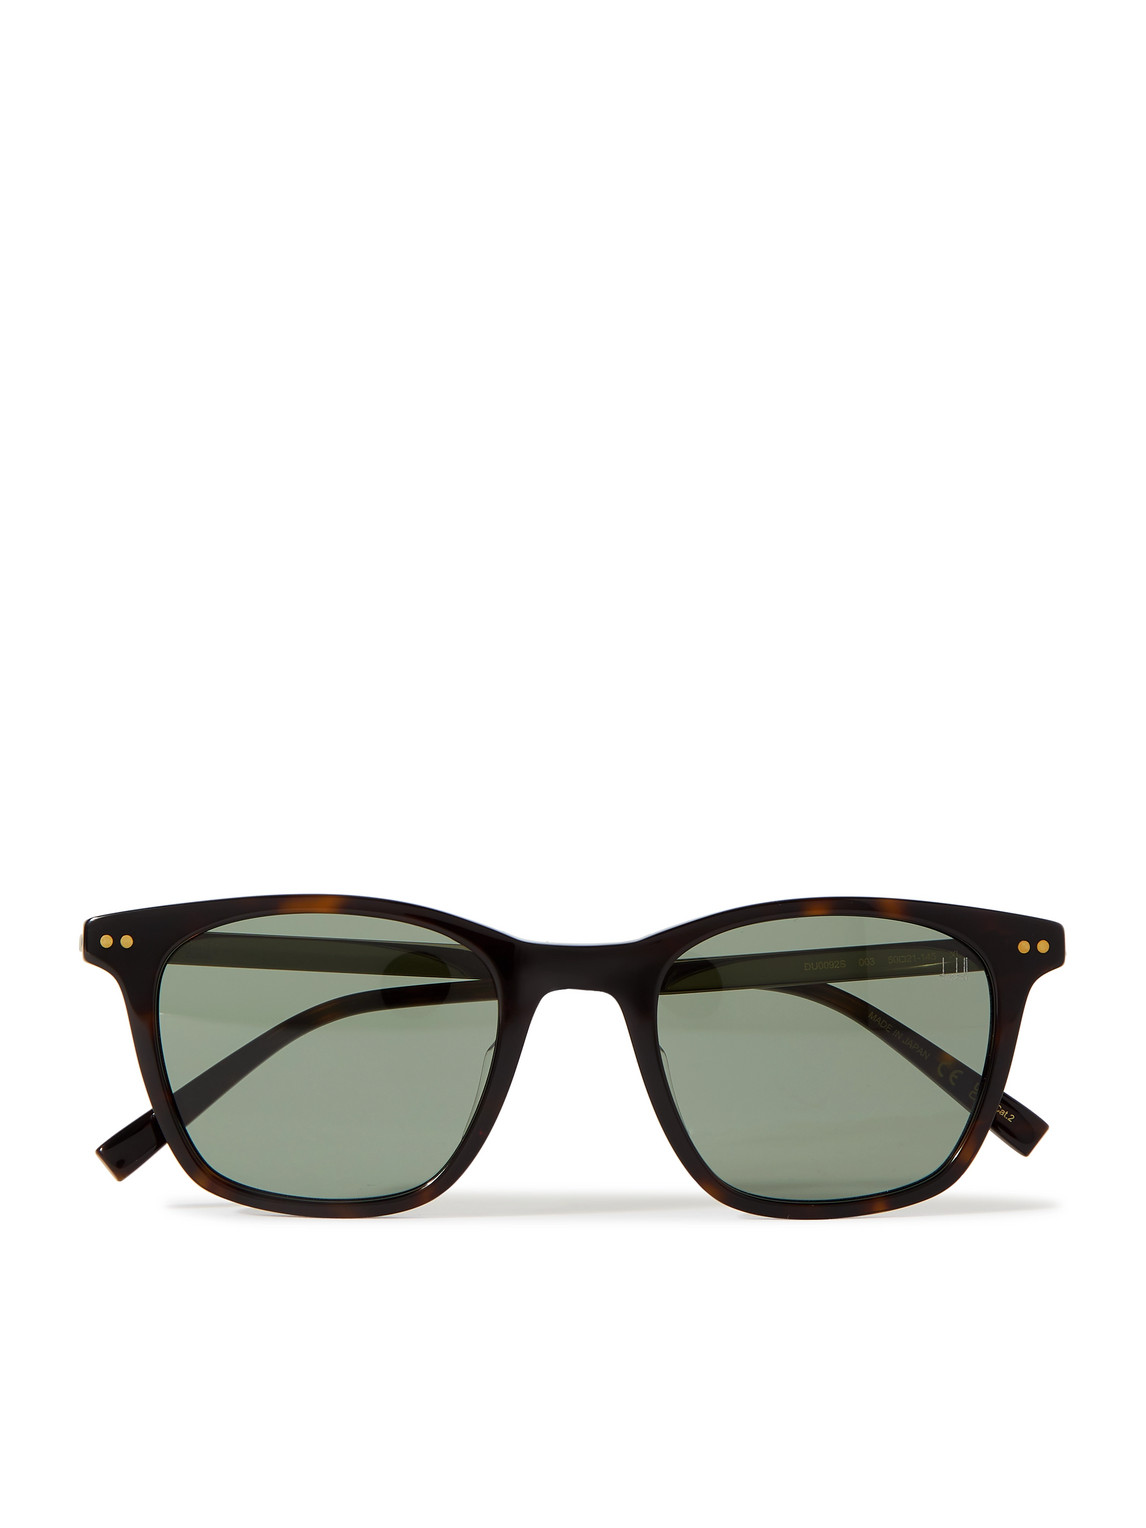 Dunhill Square-frame Tortoiseshell Acetate And Gold-tone Sunglasses In Gray